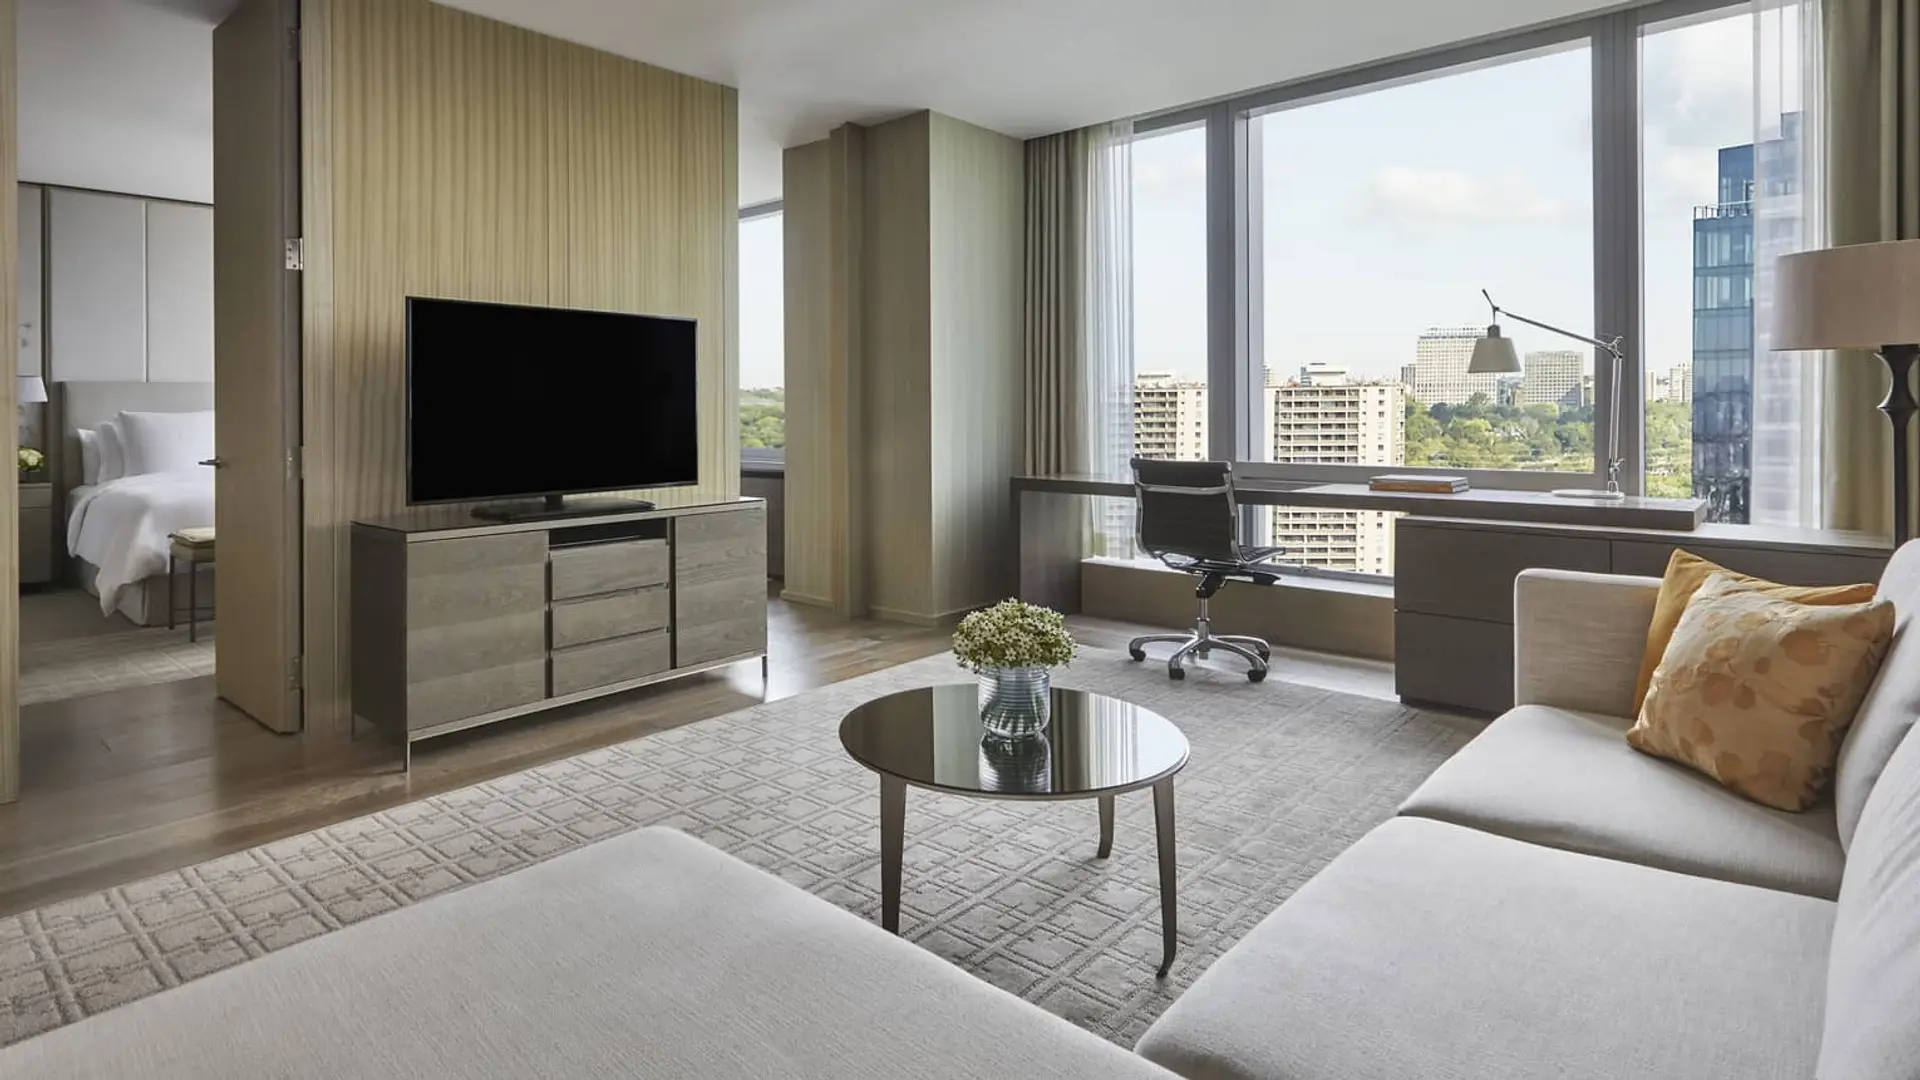 A suite hotel living room at four seasons hotel toronto